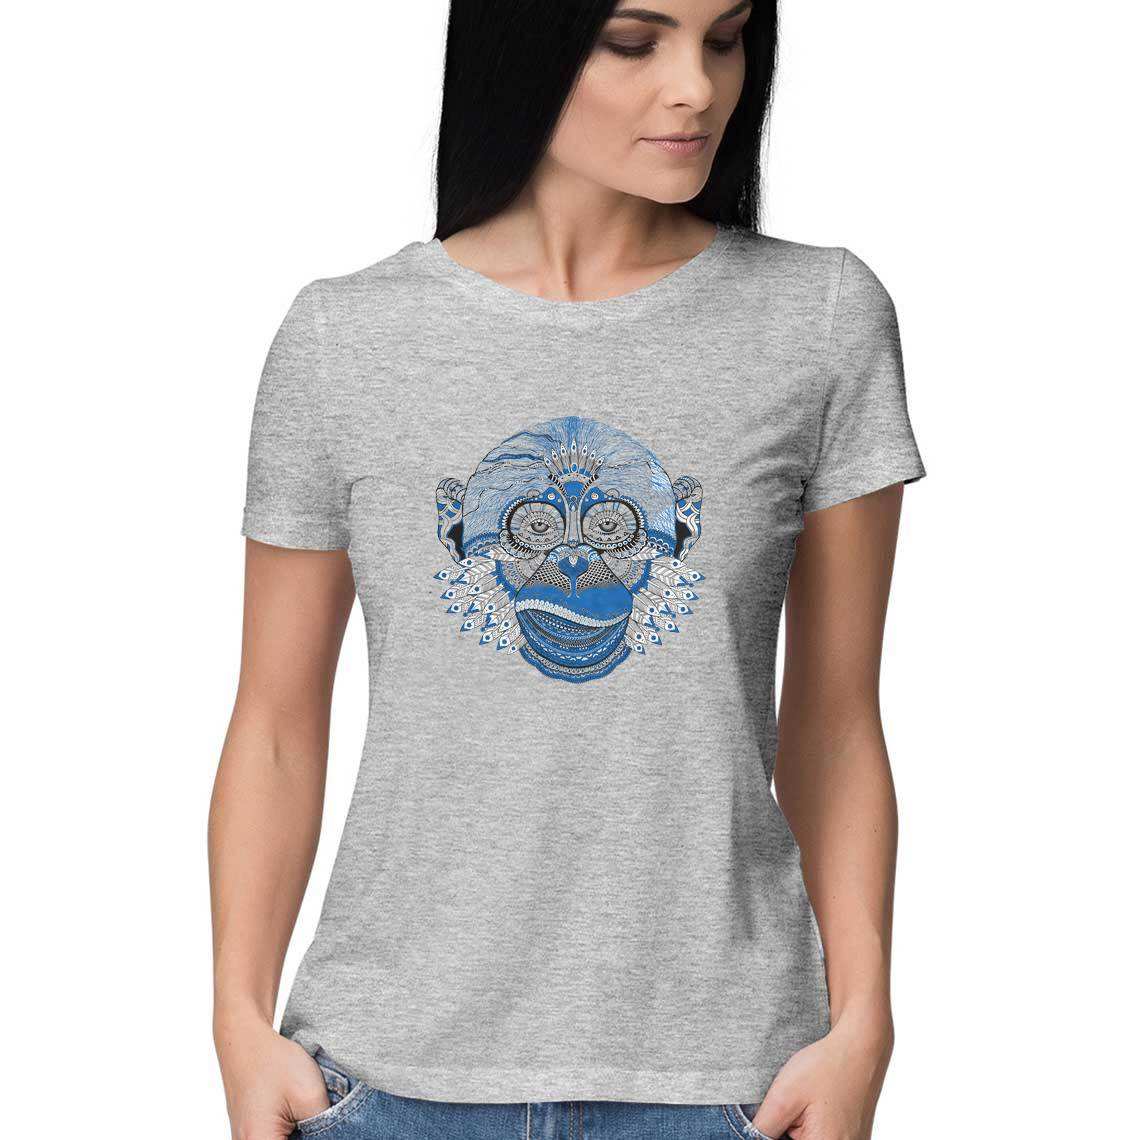 The Sage Money from the Lost Island of Khaaha Women's Graphic T-Shirt - CBD Store India